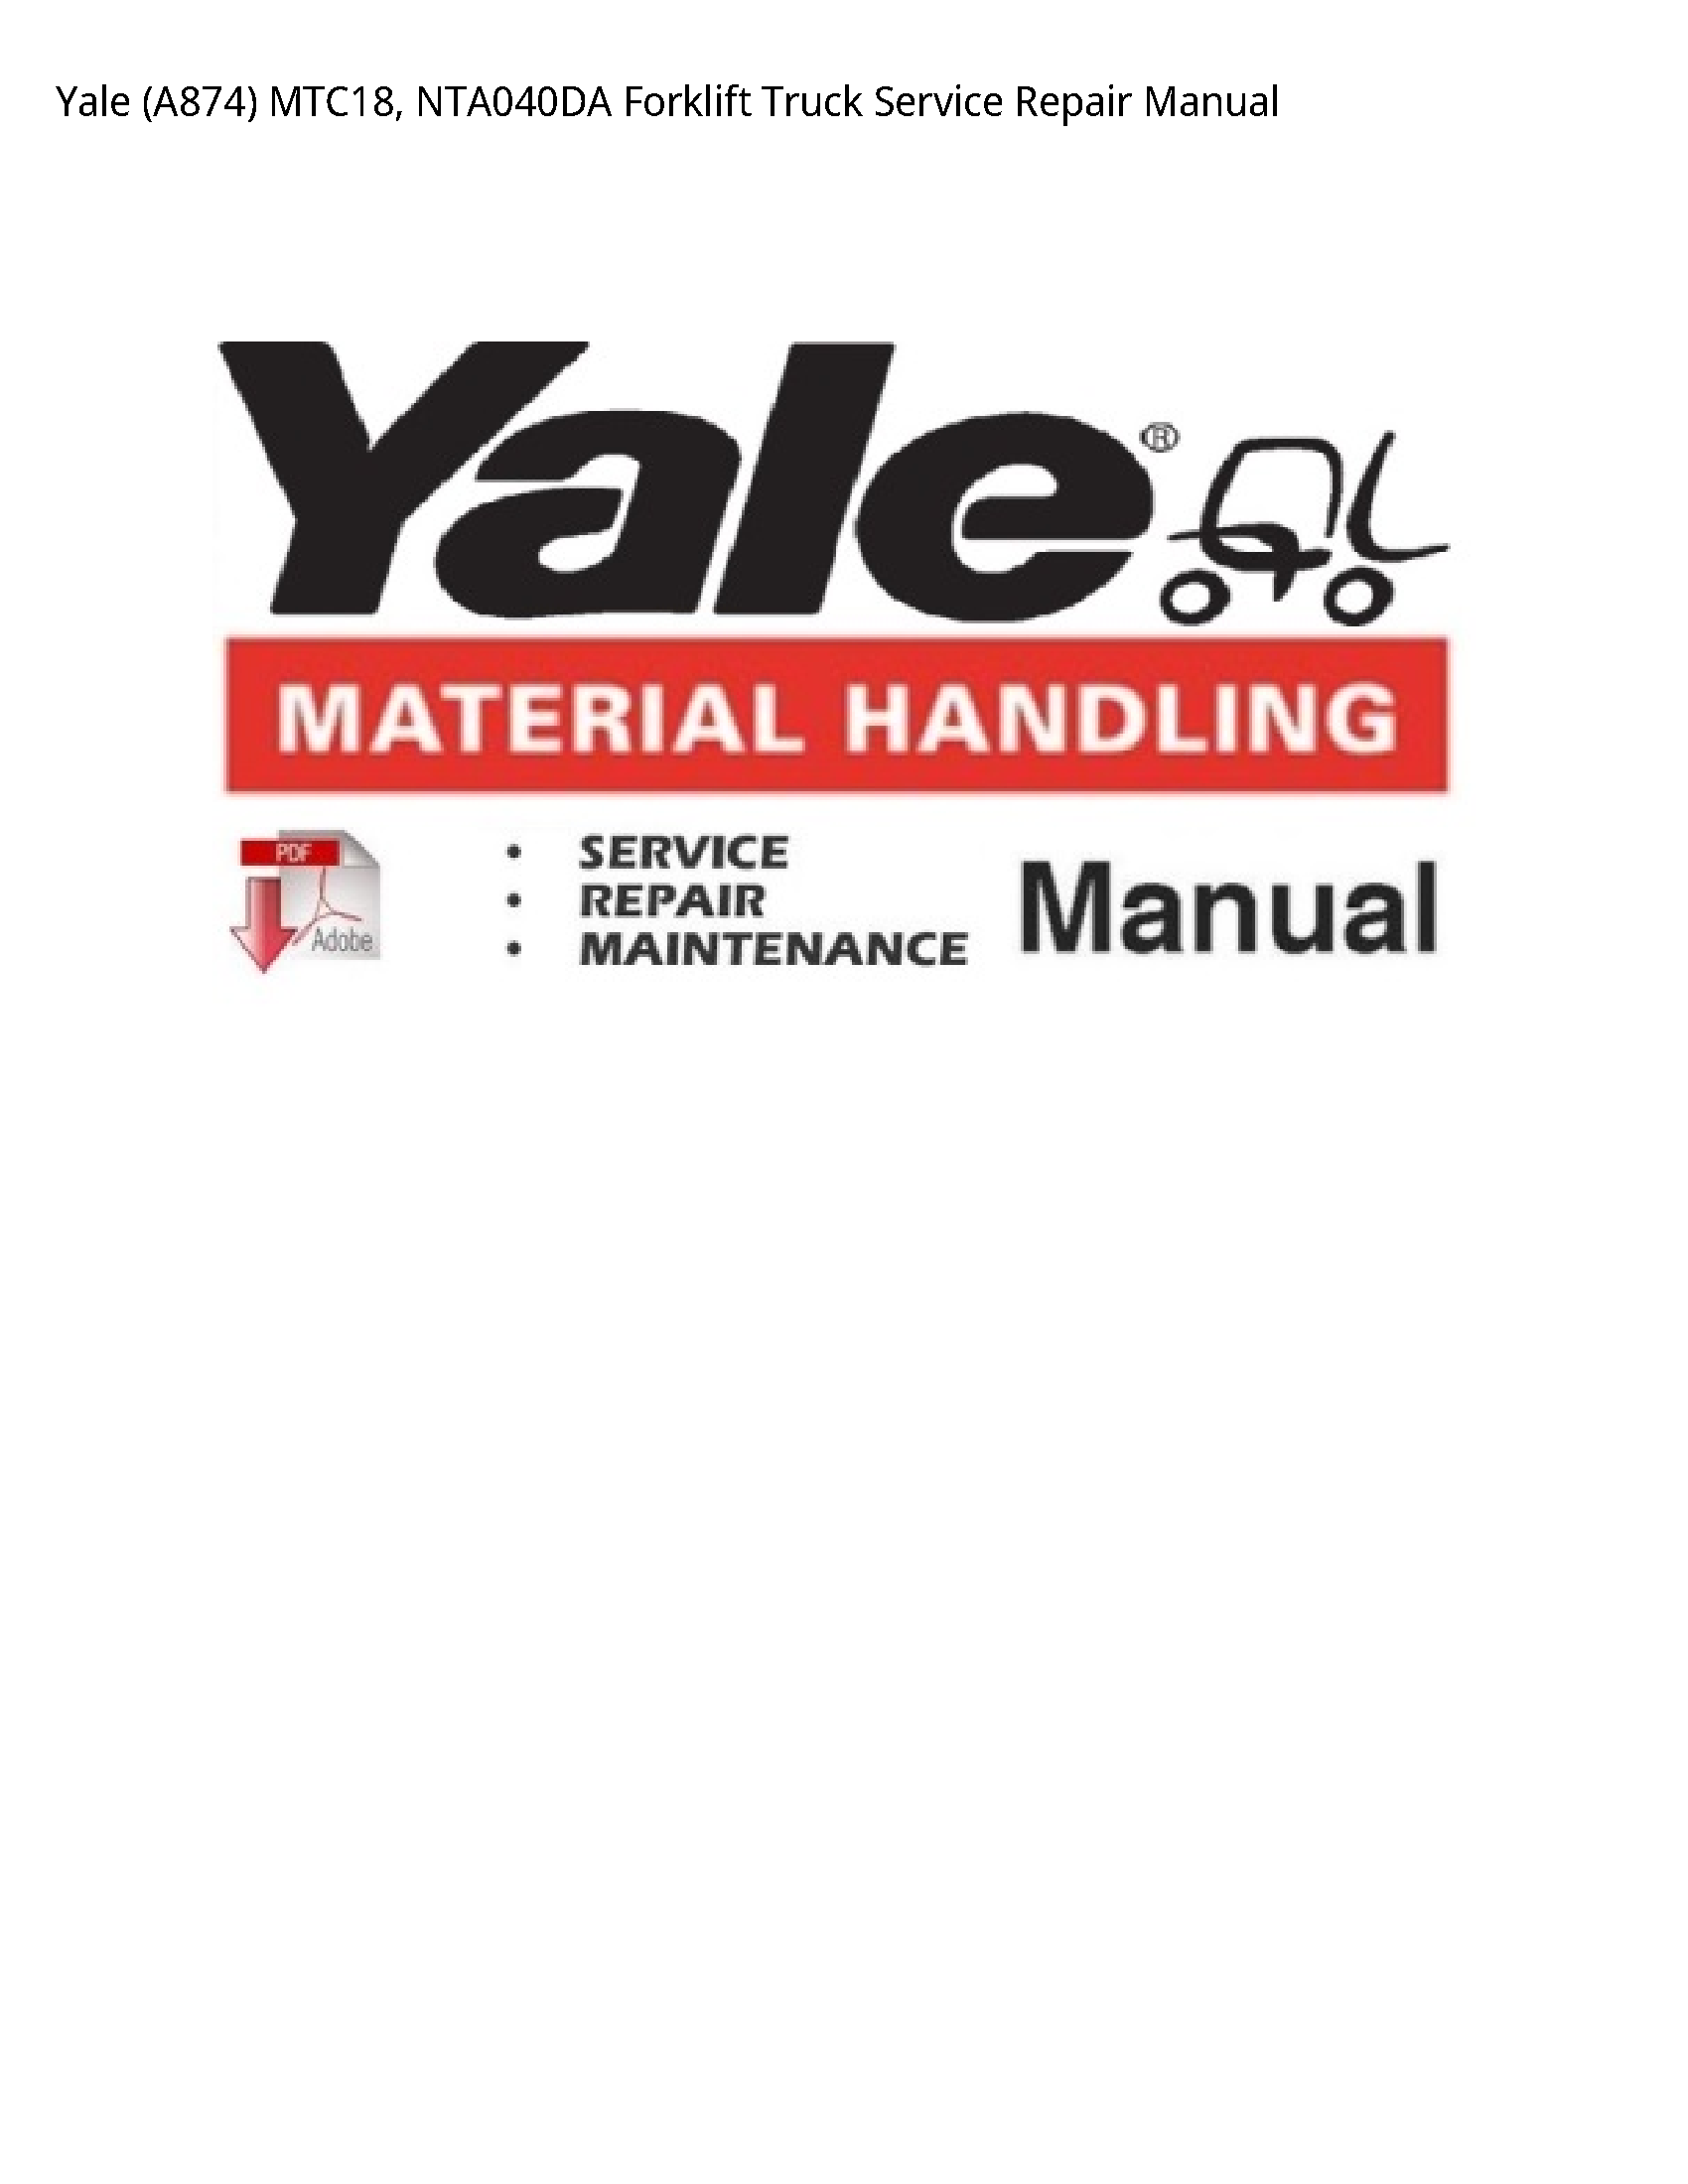 Yale (A874) Forklift Truck manual